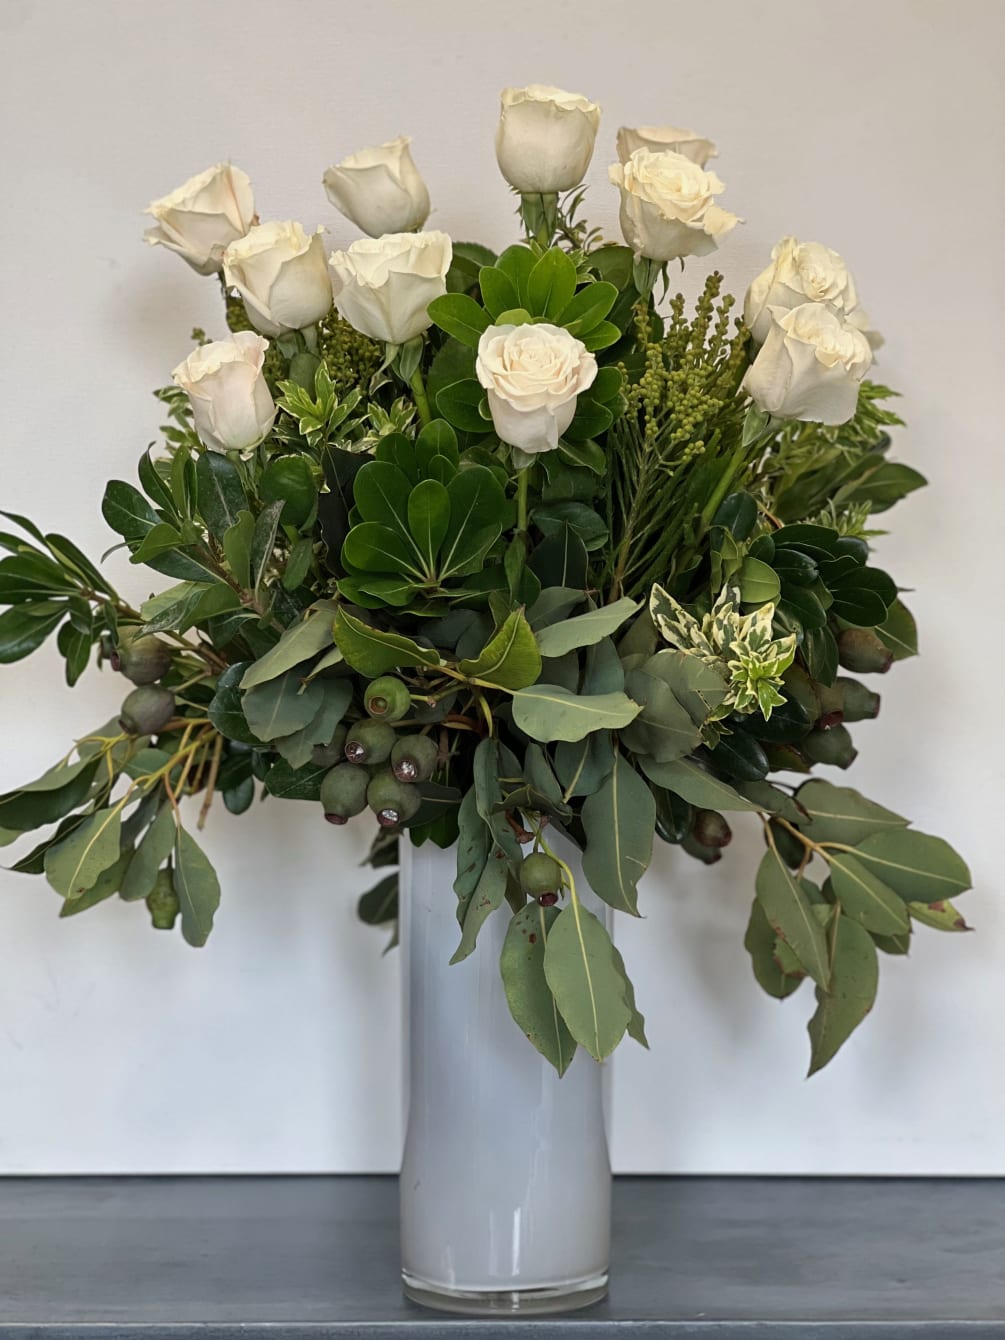 A dozen roses accentuated by textures of lush greenery.  If you